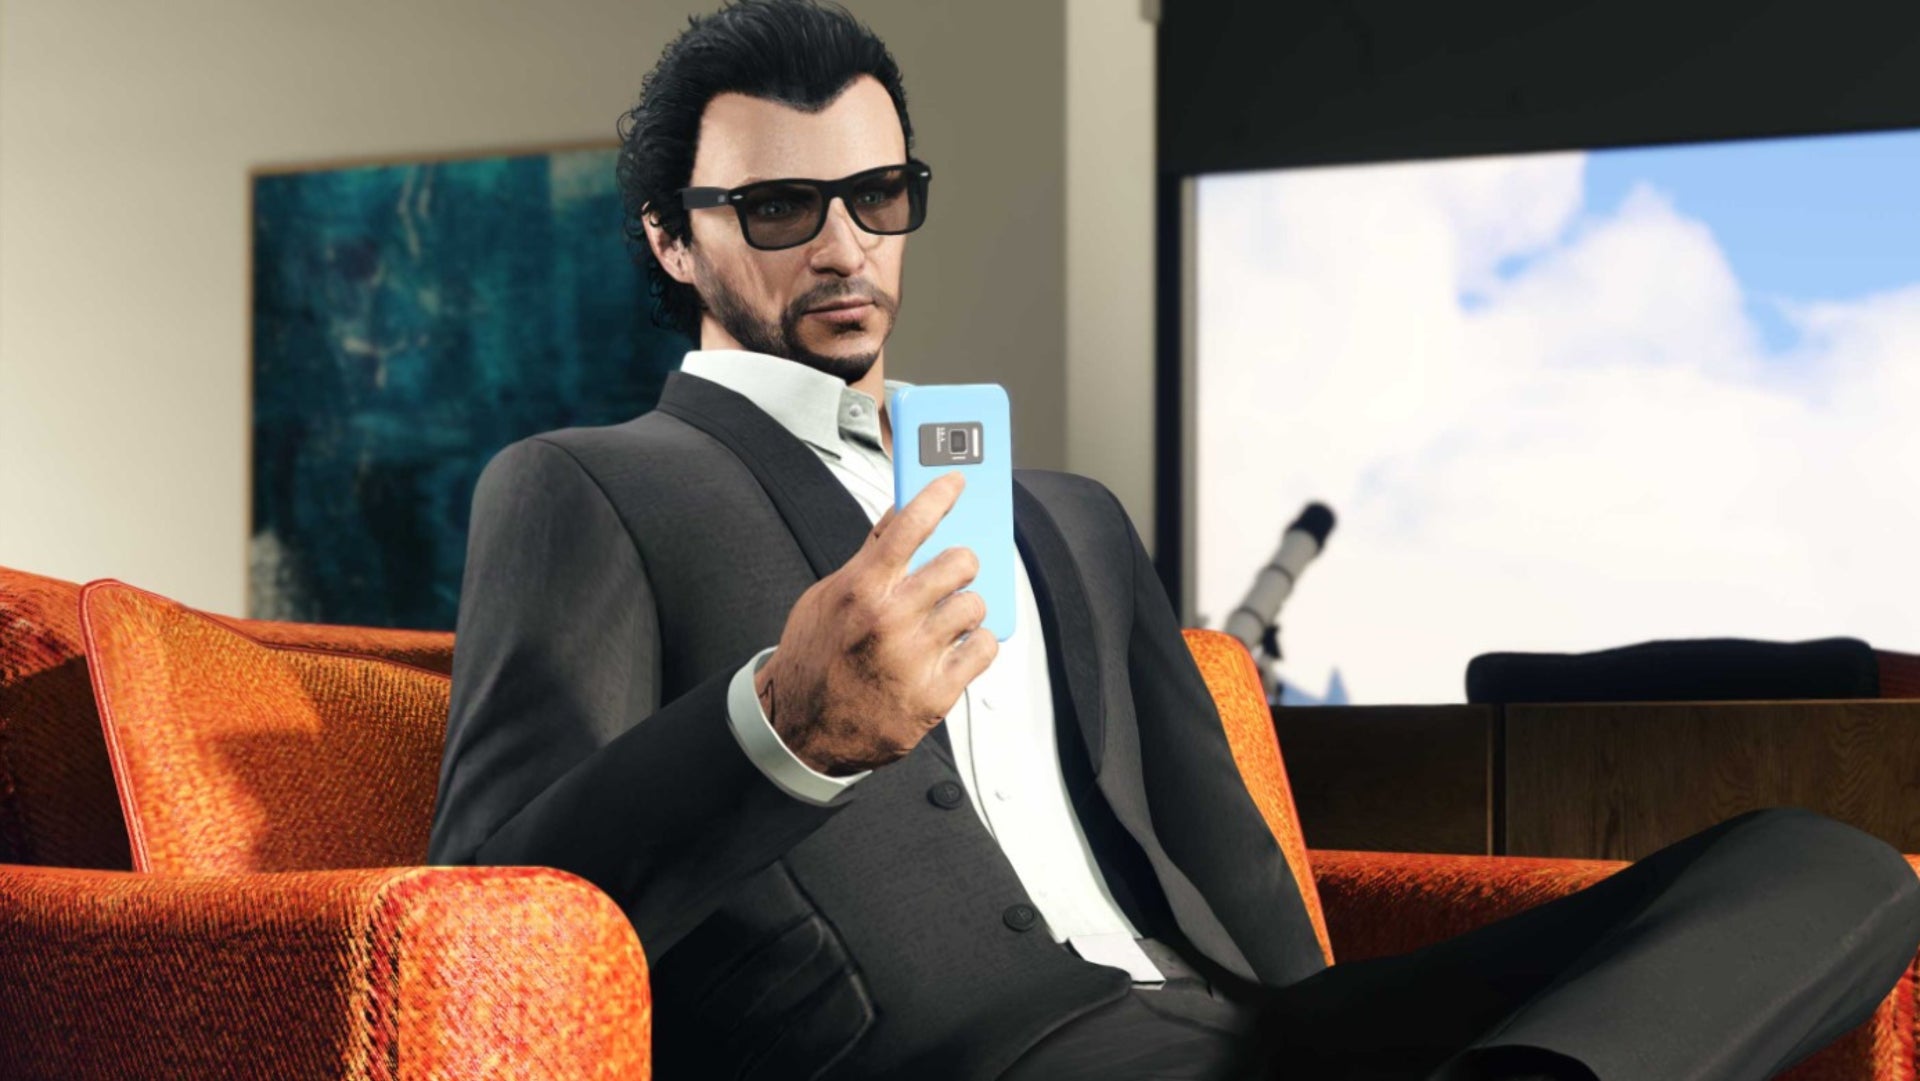 GTA Online Rockstar Newswire image of a character sat on a sofa wearing sunglasses and holding a phone.